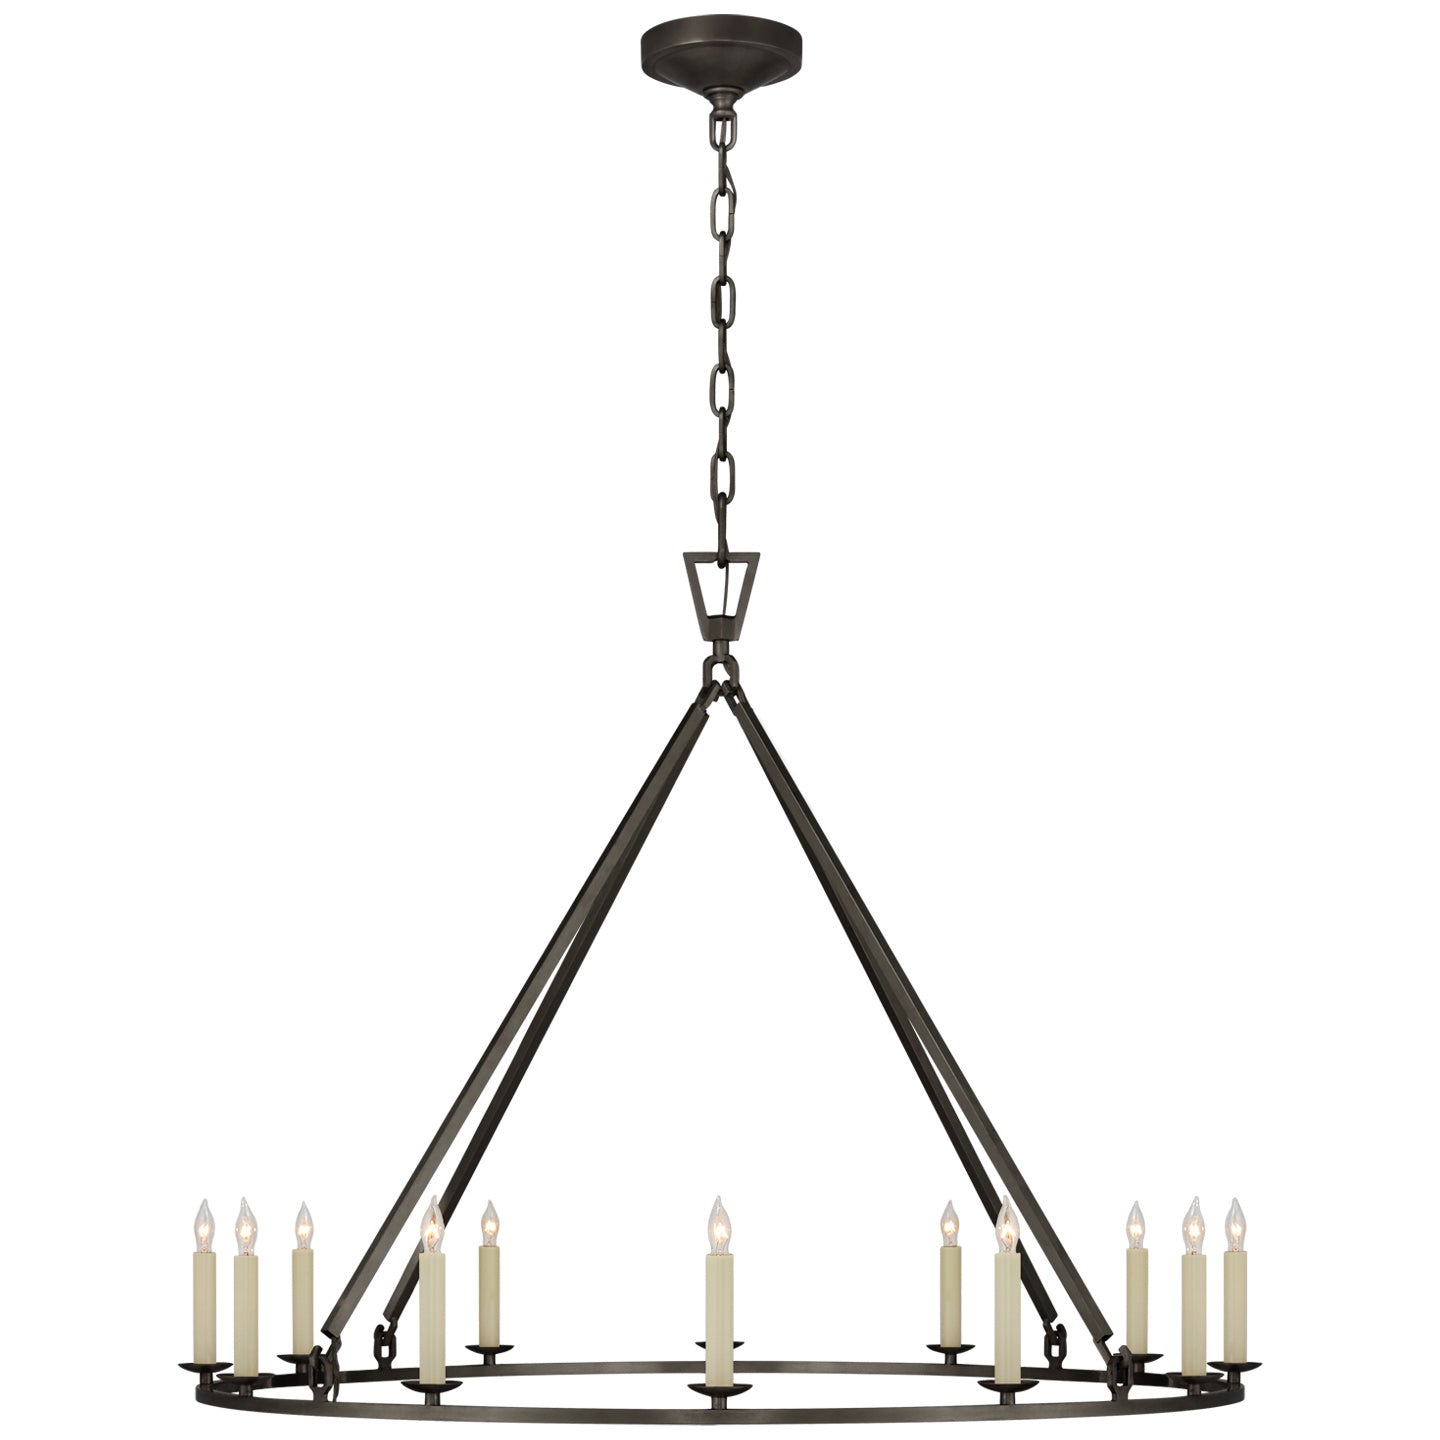 Load image into Gallery viewer, Visual Comfort Signature - CHC 5174AI - 12 Light Chandelier - Darlana Ring - Aged Iron
